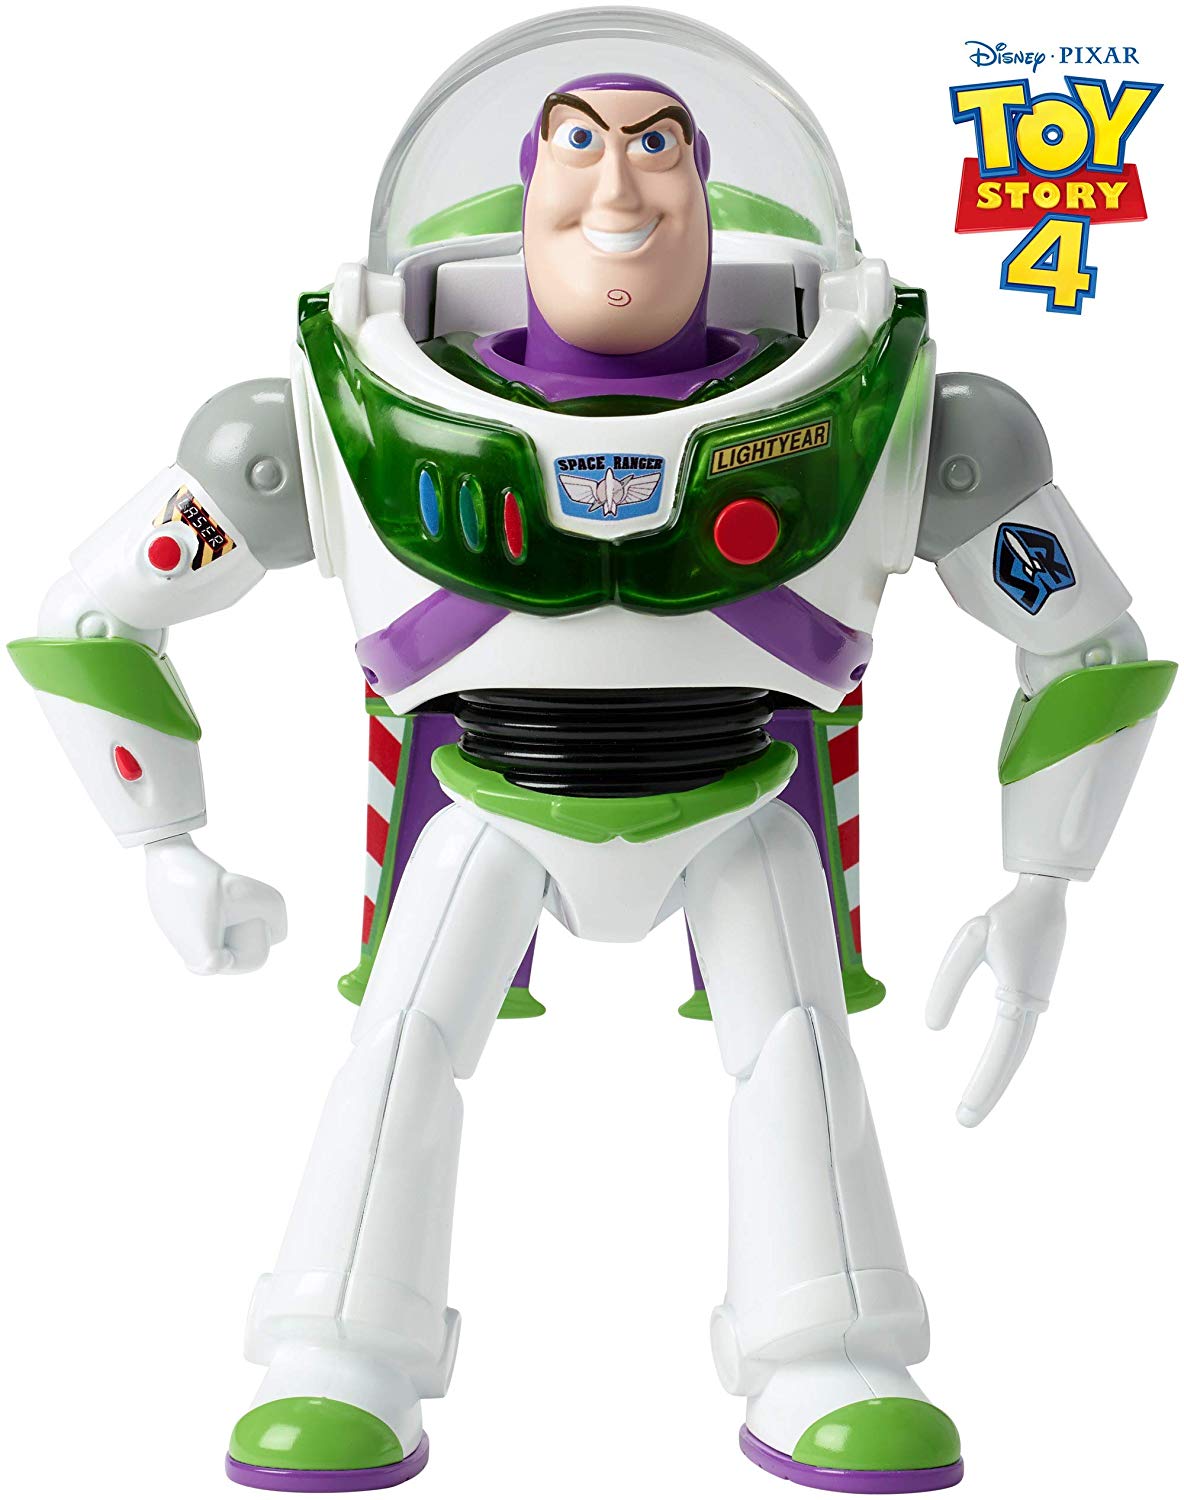 Mattel Ggh41 Toy Story 4 Buzz Lightyear Figure With Sound And Features 17 C